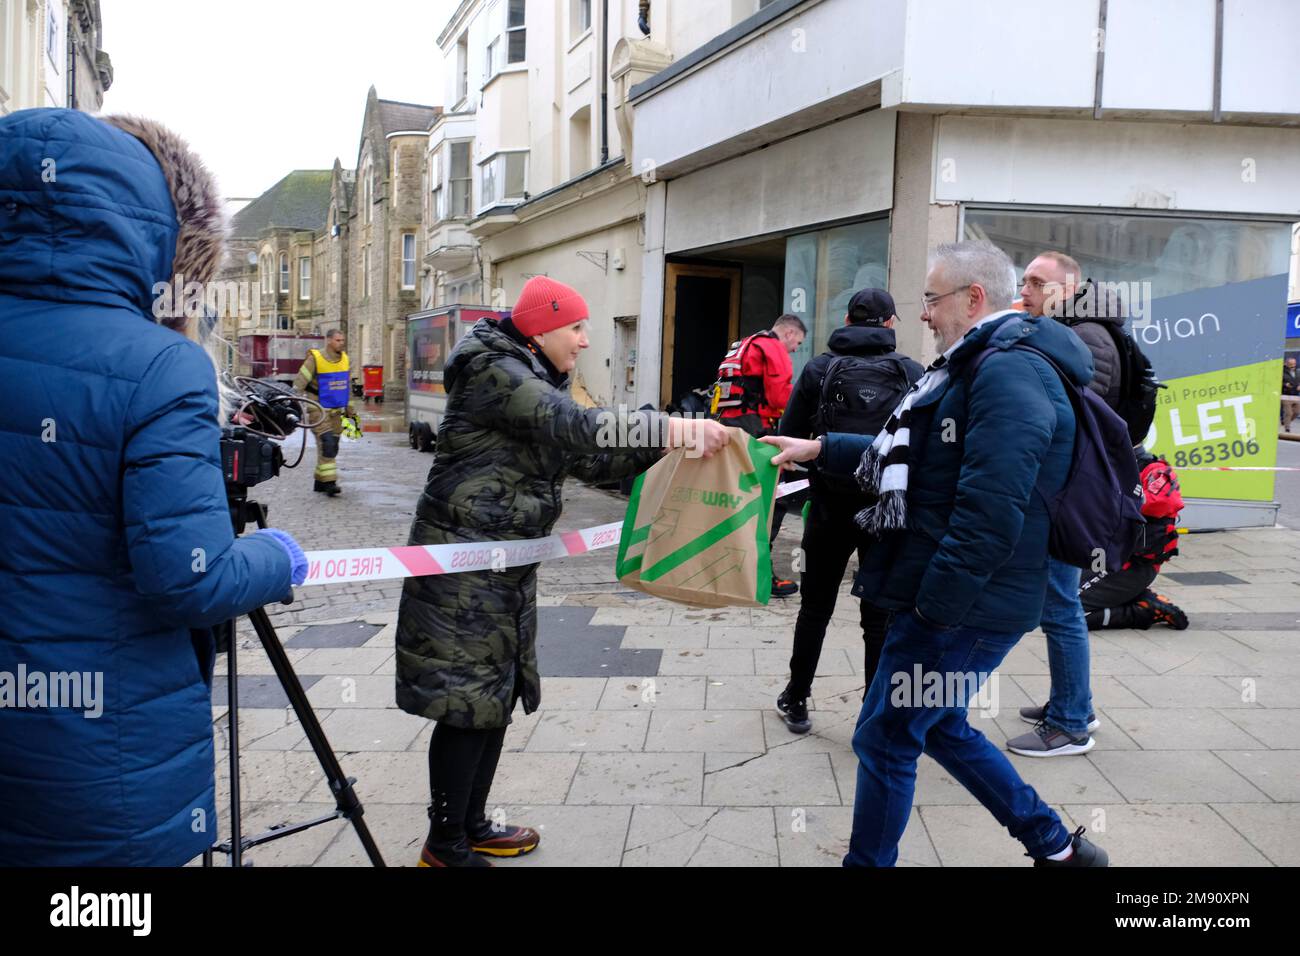 Hastings, East Sussex, 16 January 2023. Heavy rain and blocked storm drain to the sea causes major flood in Hastings Town Centre, closing Priory Meadow shopping centre and flooding homes and businesses. Agi from Subway sandwich shop gives away bread to passers-by. Carolyn Clarke/Alamy Live News Stock Photo